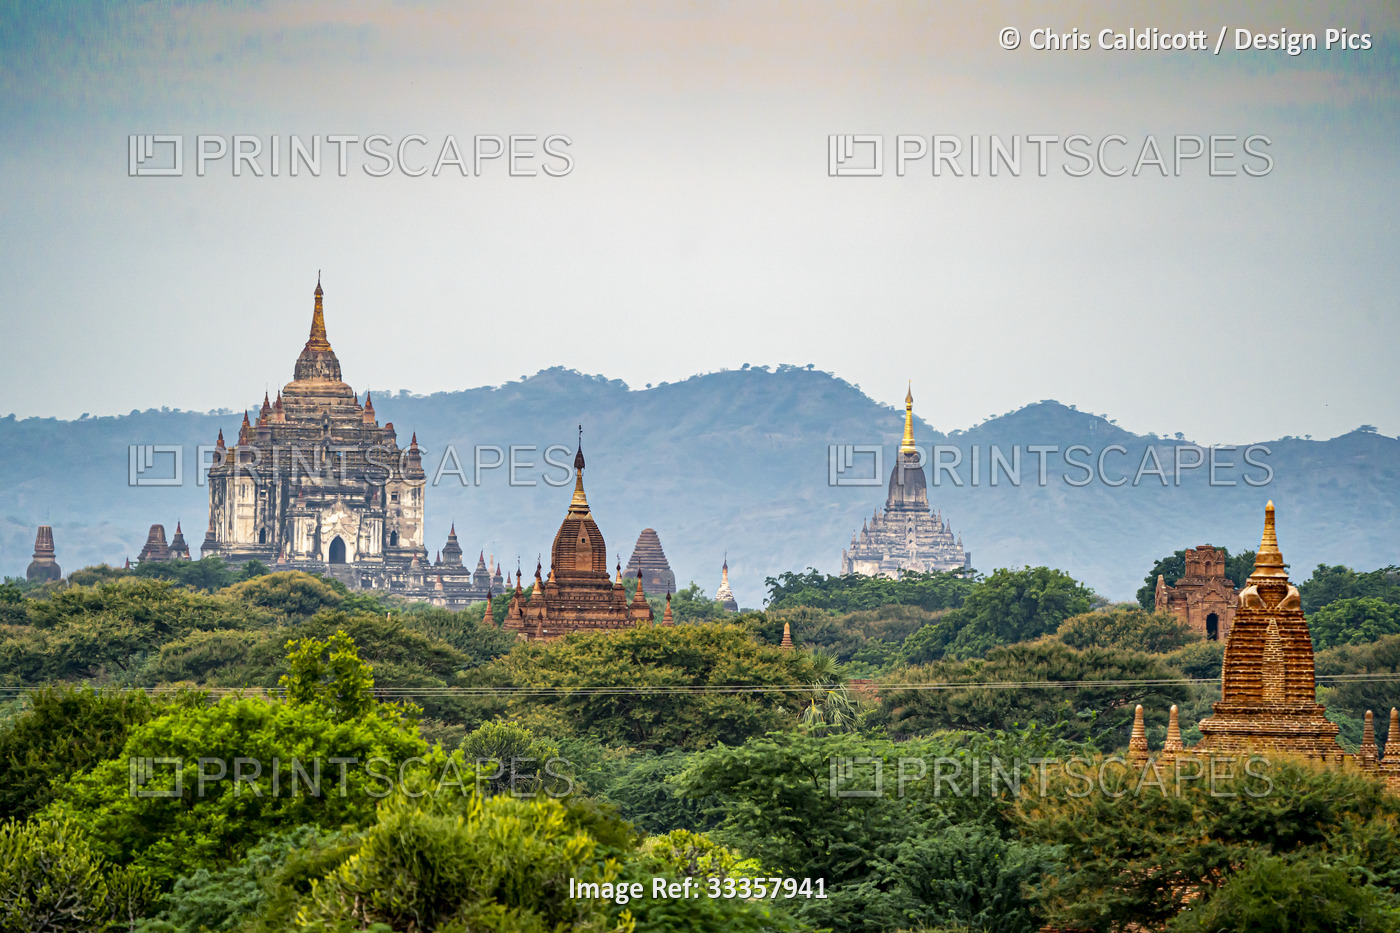 Thatbyinnyu Temple and pagodas in the morning light, displaying their ornate ...